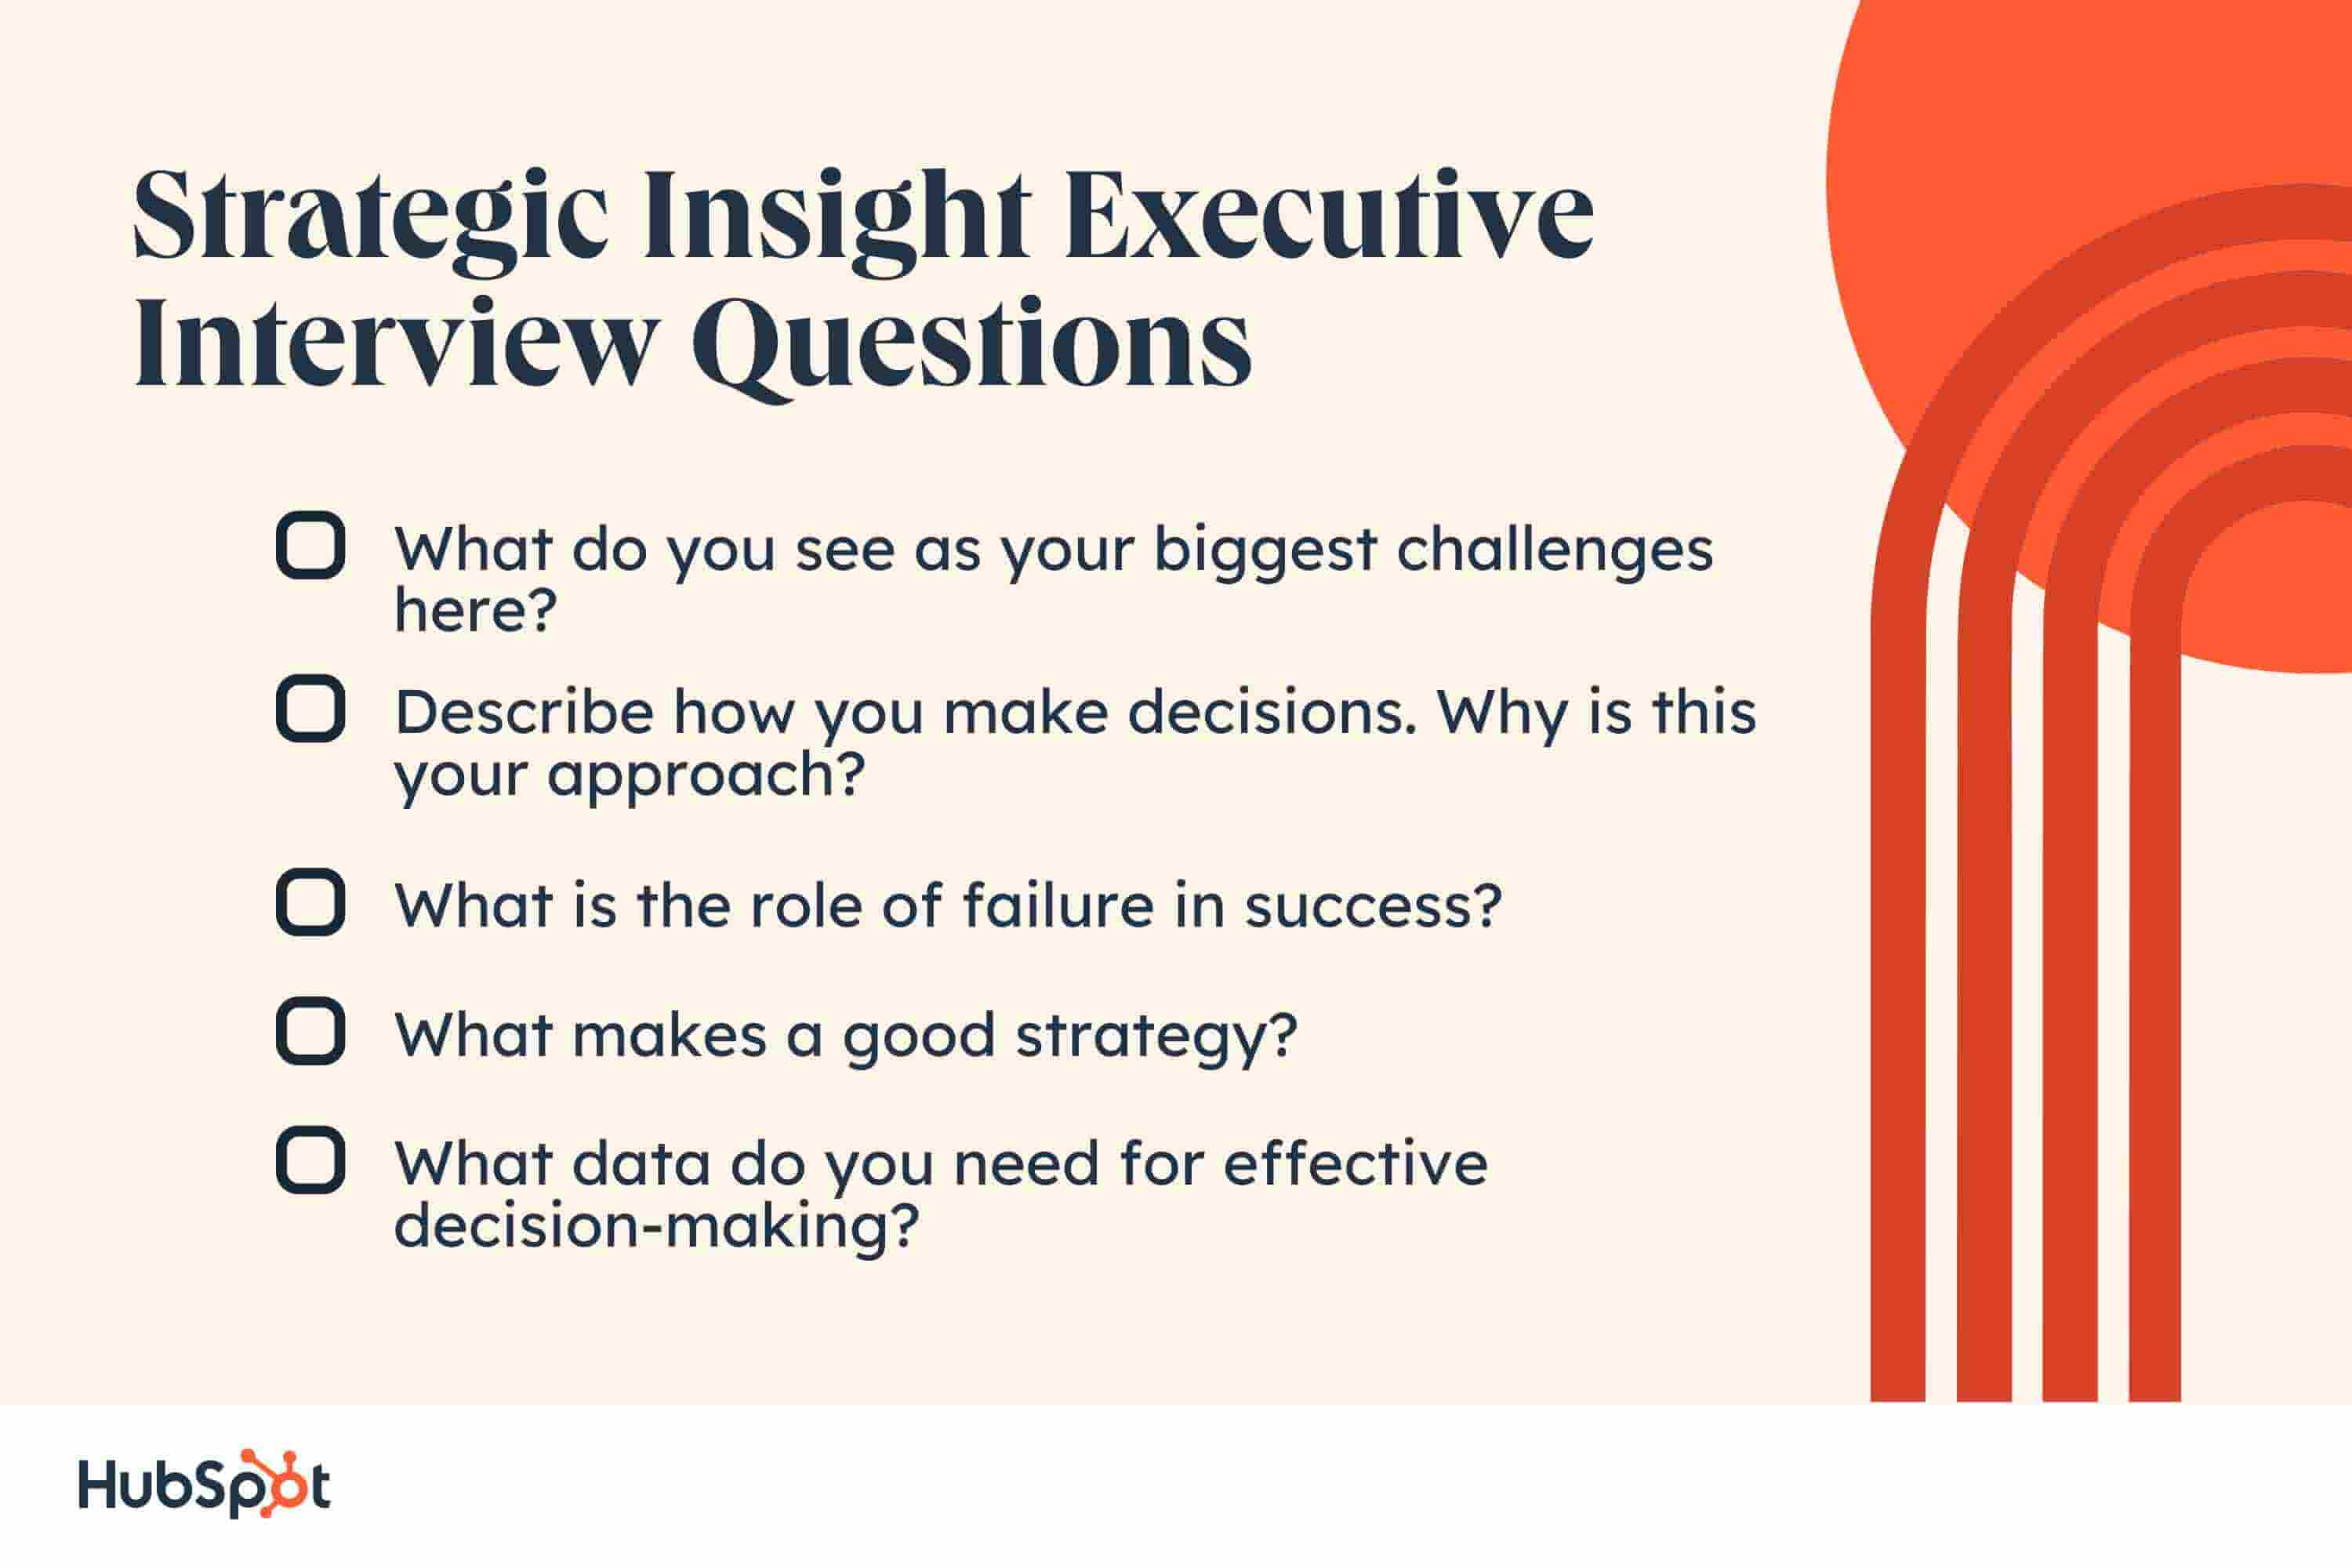 Strategic Insight Interview Questions. What do you see as your biggest challenges here? Describe how you make decisions. Why is this your approach? What is the role of failure in success? What makes a good strategy? What data do you need for effective decision-making?